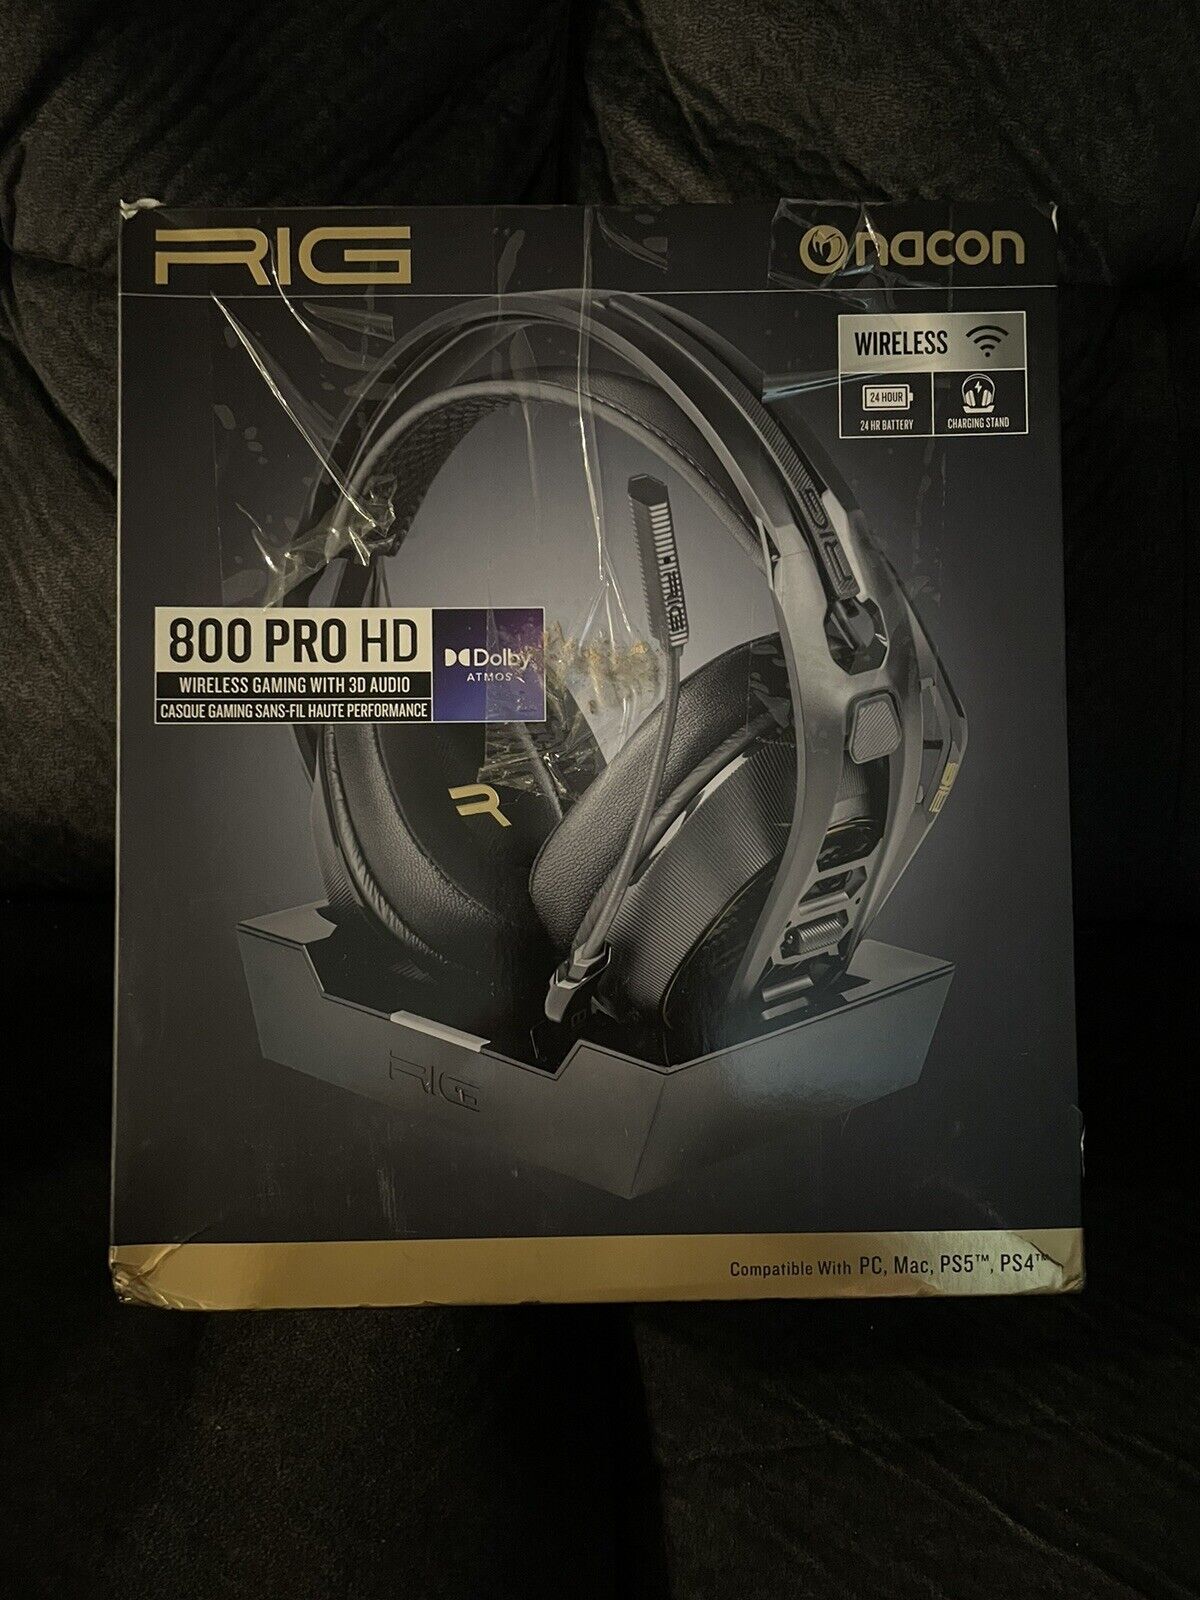 Interesting Nacon RIG 800 PRO HD Black Multi-Function Wireless Over The Ear Gaming Headset on eBay